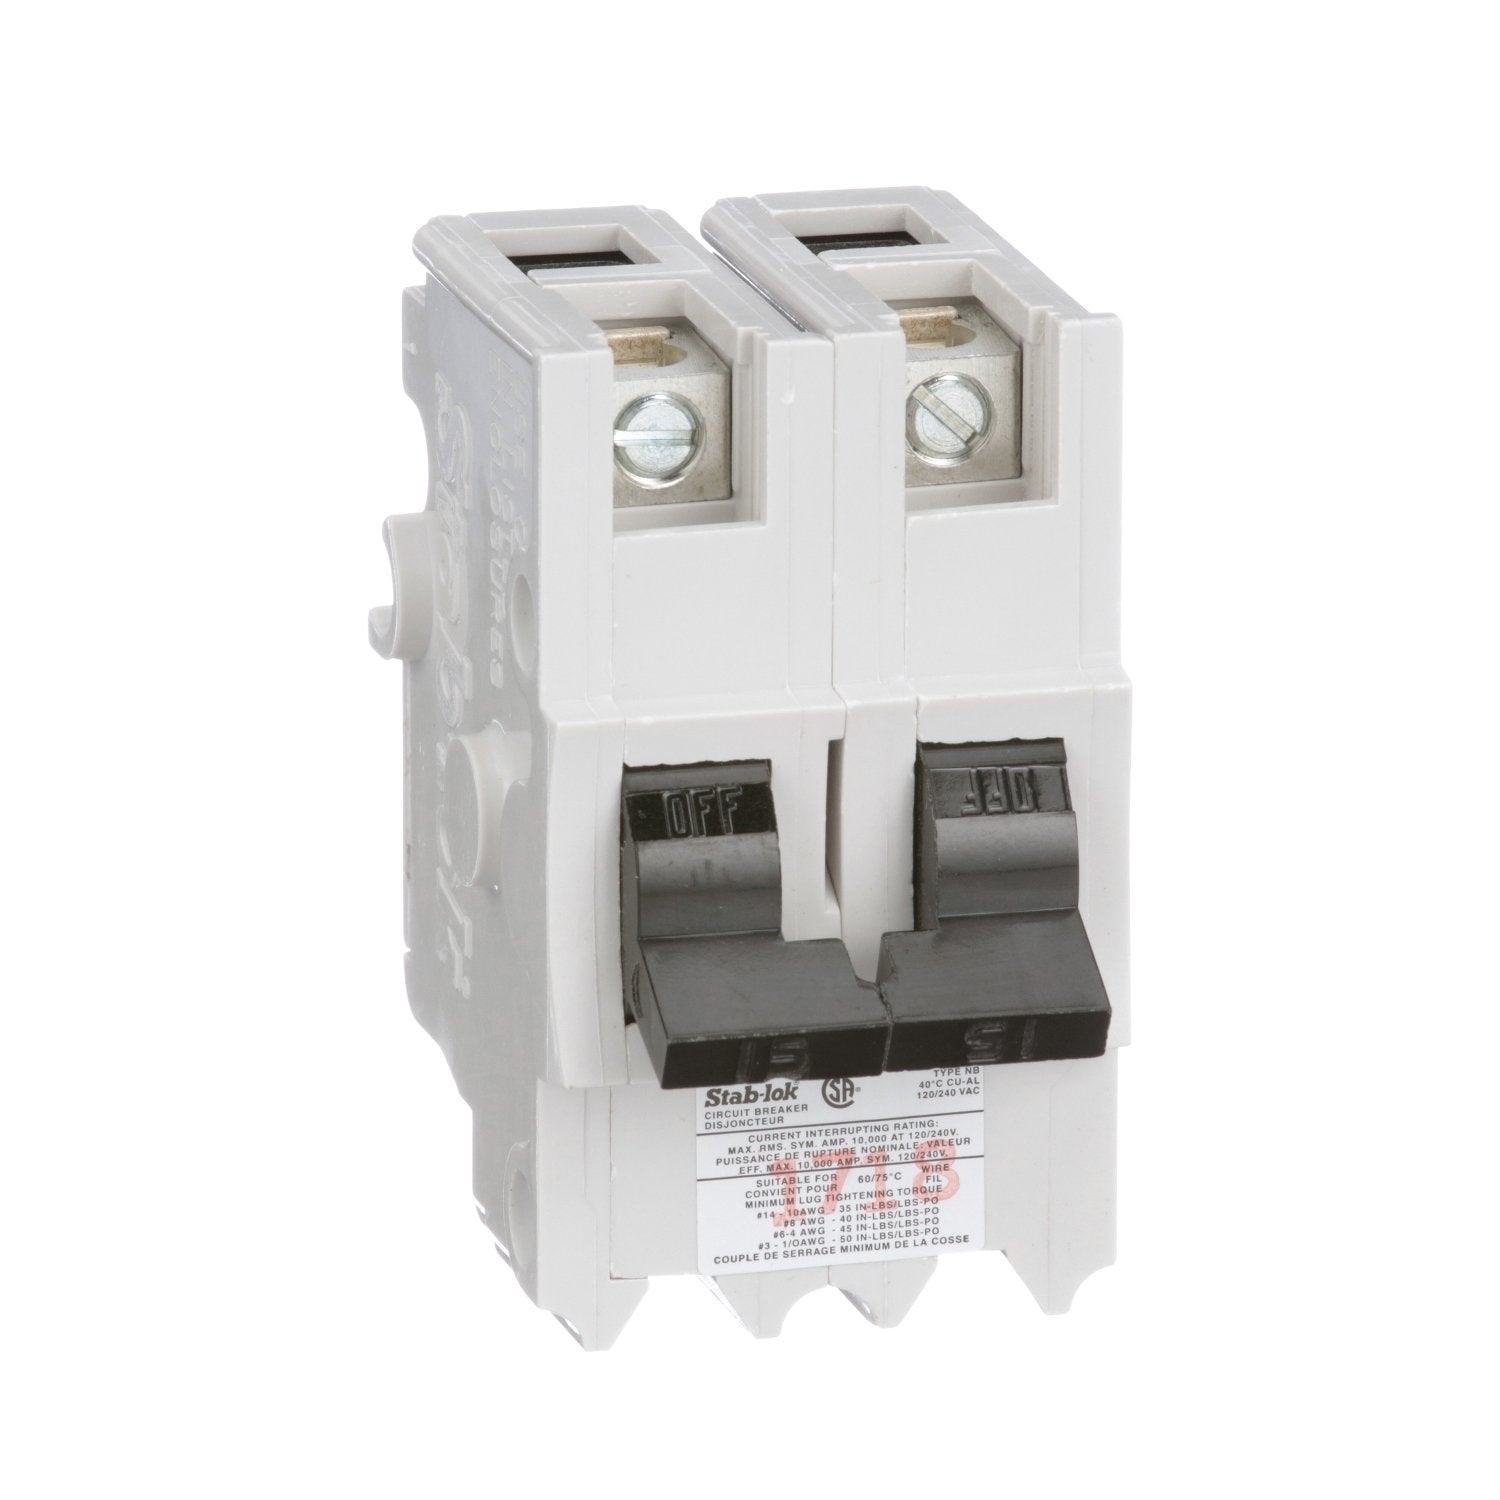 NB230 - Federal Pioneer 30 Amp Double Pole Bolt-On Circuit Breaker